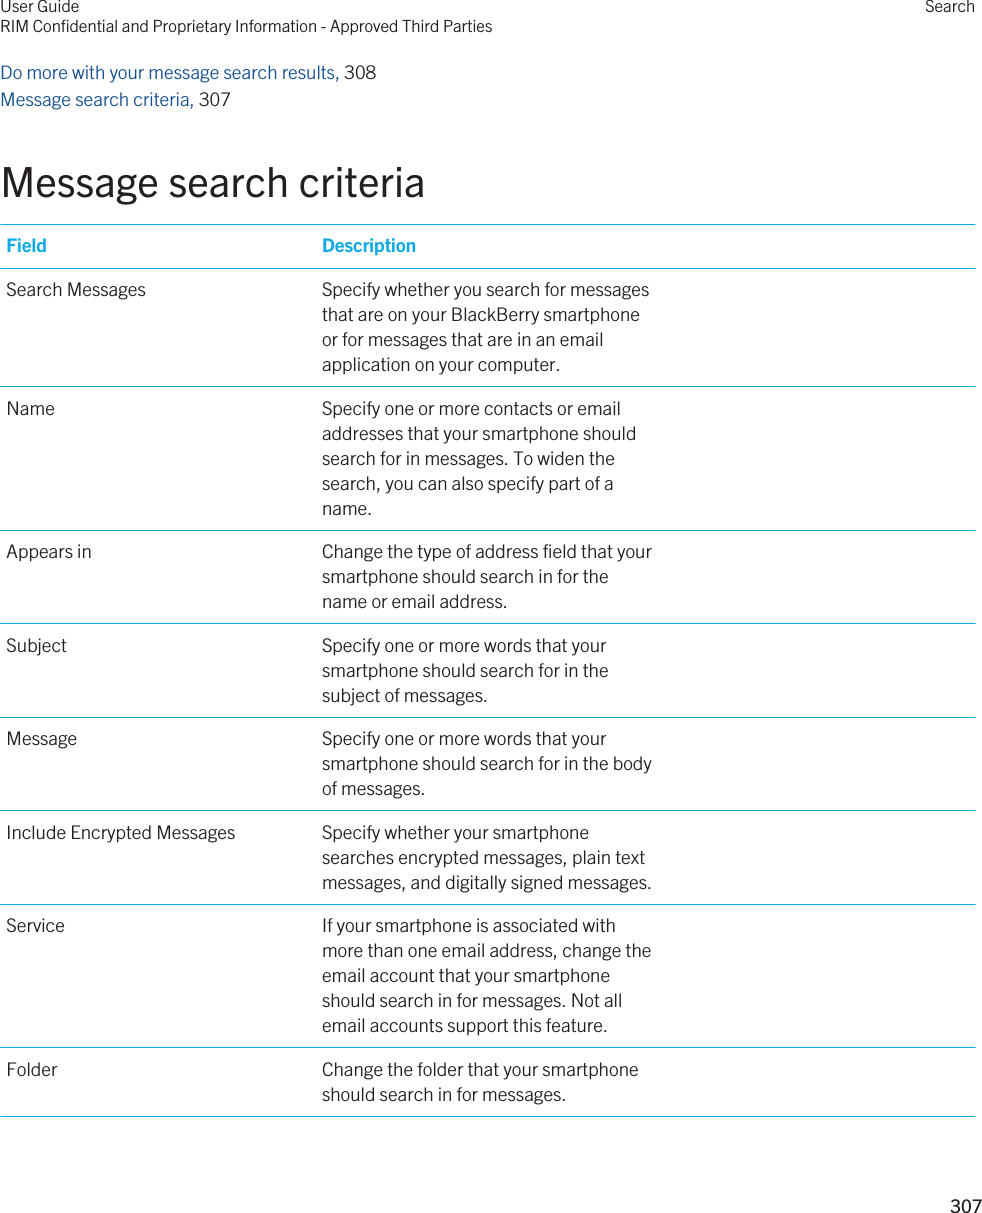 Do more with your message search results, 308Message search criteria, 307Message search criteriaField DescriptionSearch Messages Specify whether you search for messages that are on your BlackBerry smartphone or for messages that are in an email application on your computer.Name Specify one or more contacts or email addresses that your smartphone should search for in messages. To widen the search, you can also specify part of a name.Appears in Change the type of address field that your smartphone should search in for the name or email address.Subject Specify one or more words that your smartphone should search for in the subject of messages.Message Specify one or more words that your smartphone should search for in the body of messages.Include Encrypted Messages Specify whether your smartphone searches encrypted messages, plain text messages, and digitally signed messages.Service If your smartphone is associated with more than one email address, change the email account that your smartphone should search in for messages. Not all email accounts support this feature.Folder Change the folder that your smartphone should search in for messages.User GuideRIM Confidential and Proprietary Information - Approved Third PartiesSearch307 